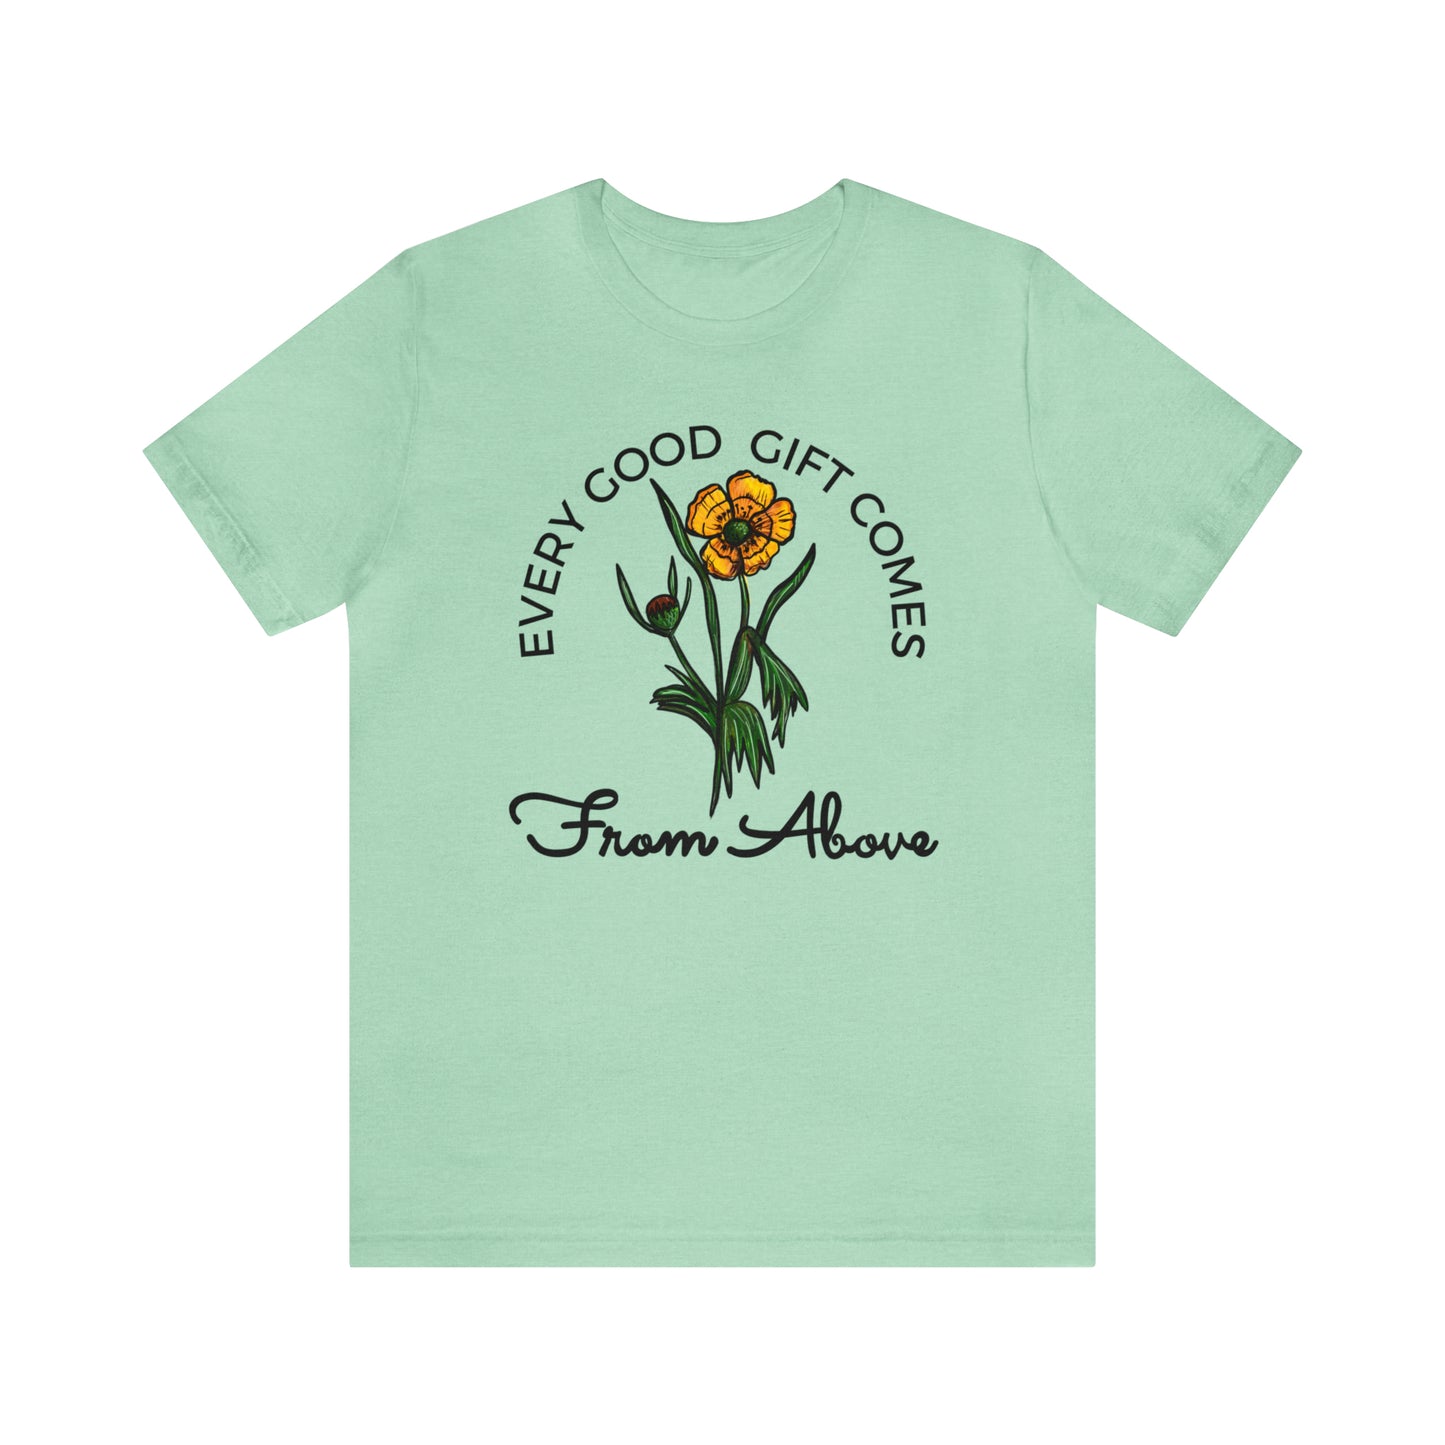 Every Good Gift Comes From Above (Green Pastures Apparel)